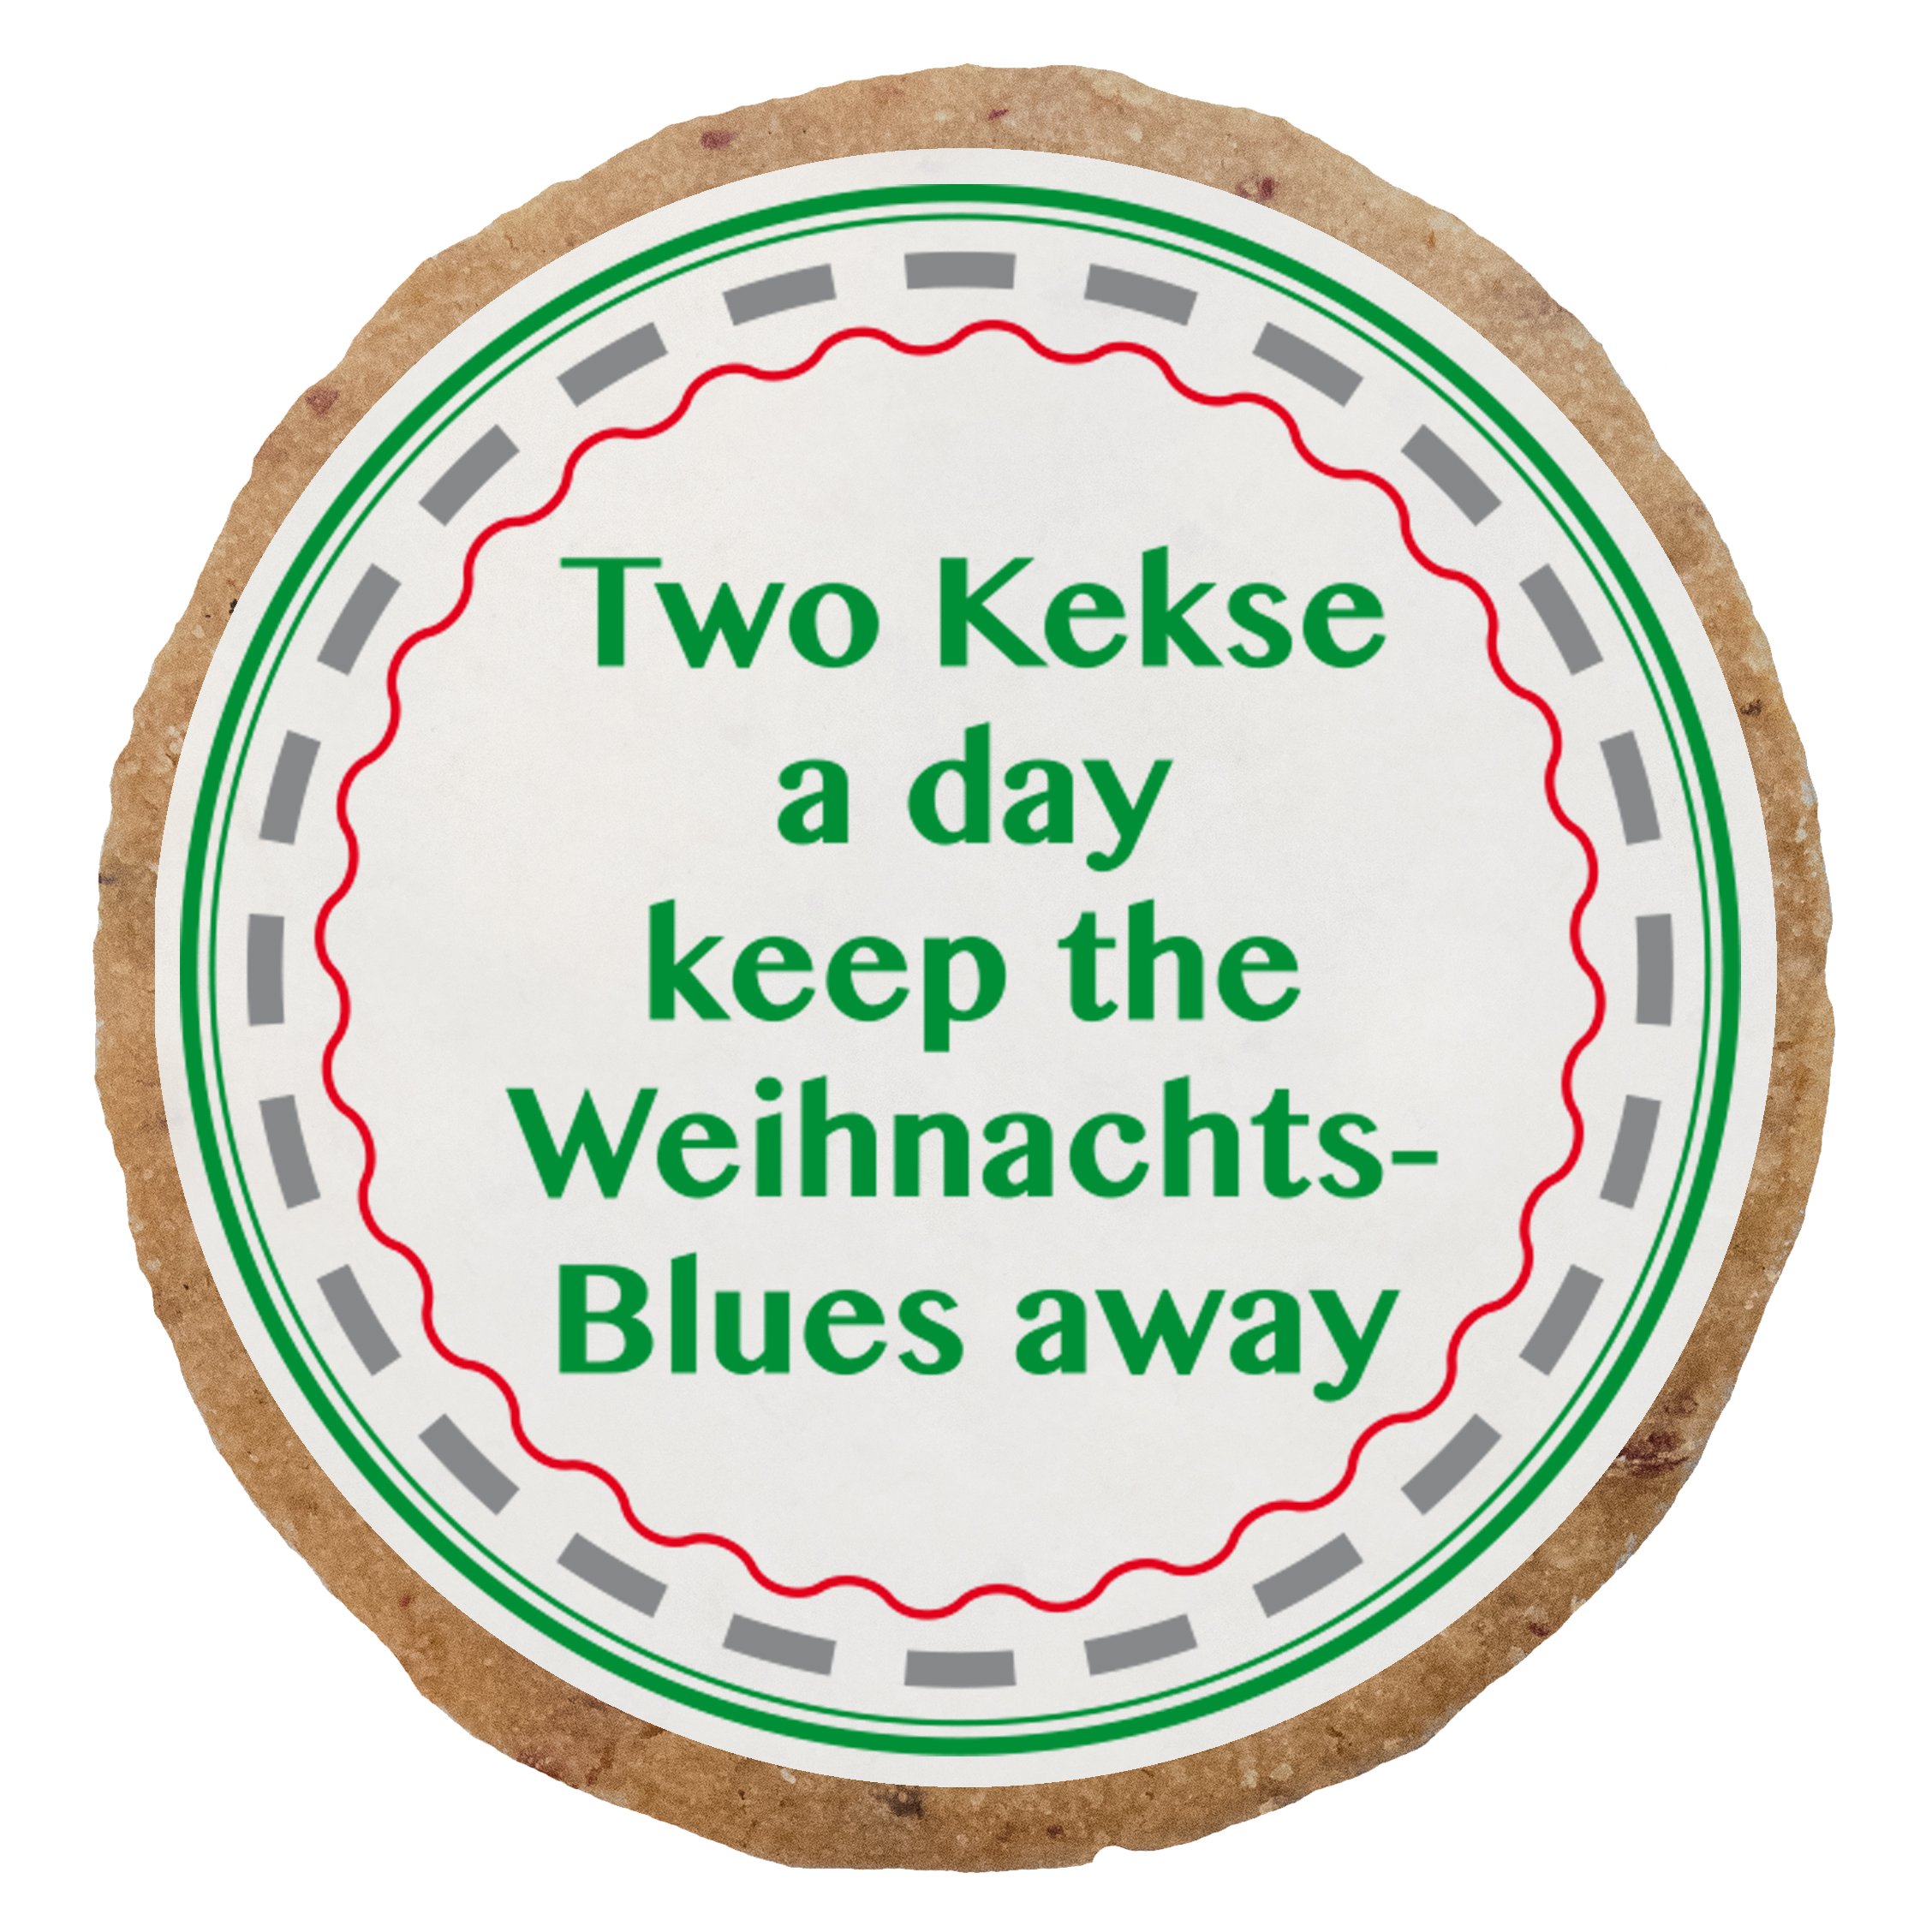 "Two KEKSE a day keep the Weihnachts-Blues away" KEKS